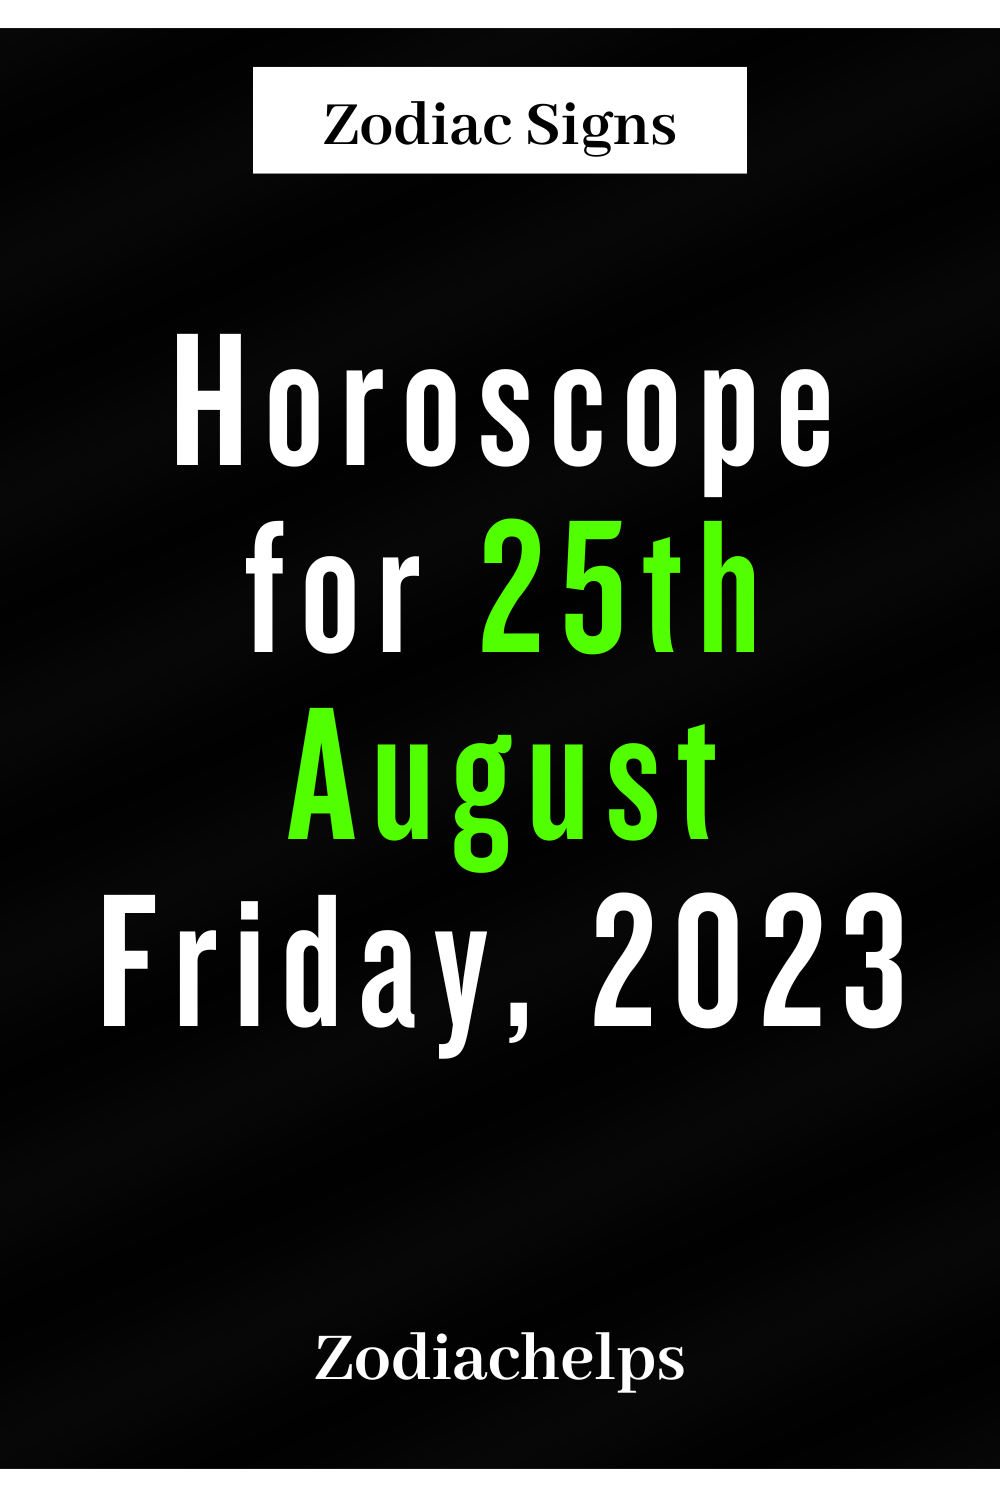 Horoscope for 25th August Friday, 2023